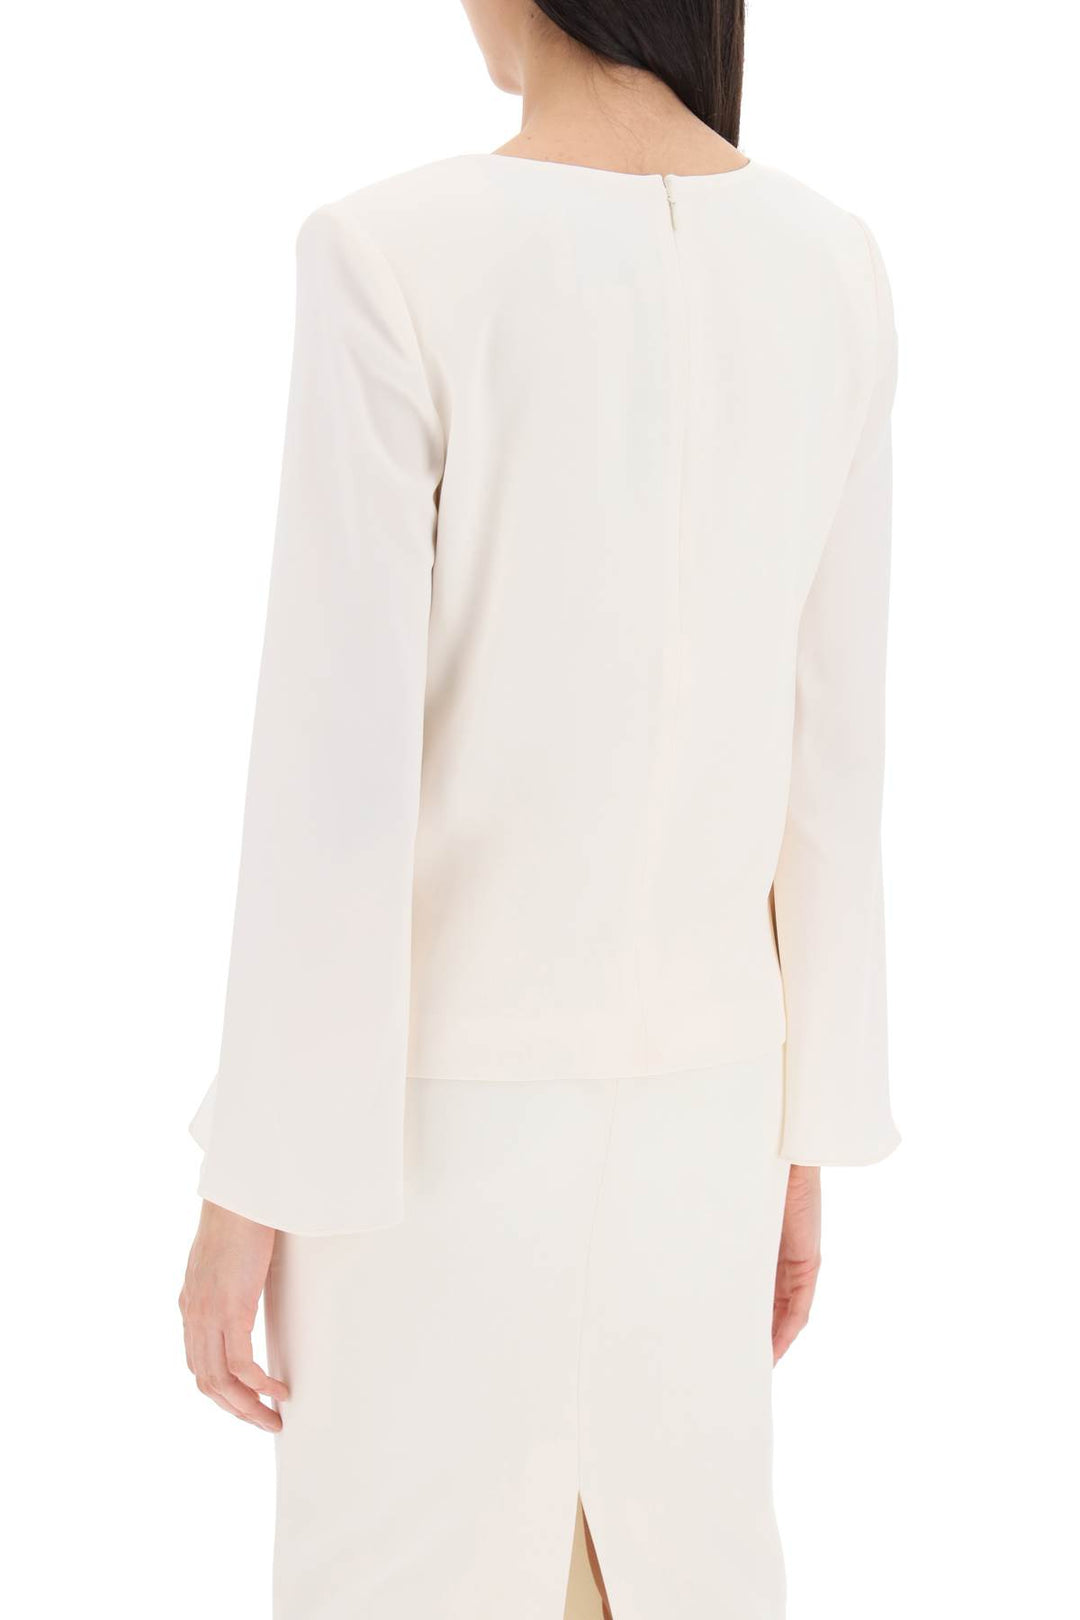 Roland Mouret Cady Top With Flared Sleeves   Bianco